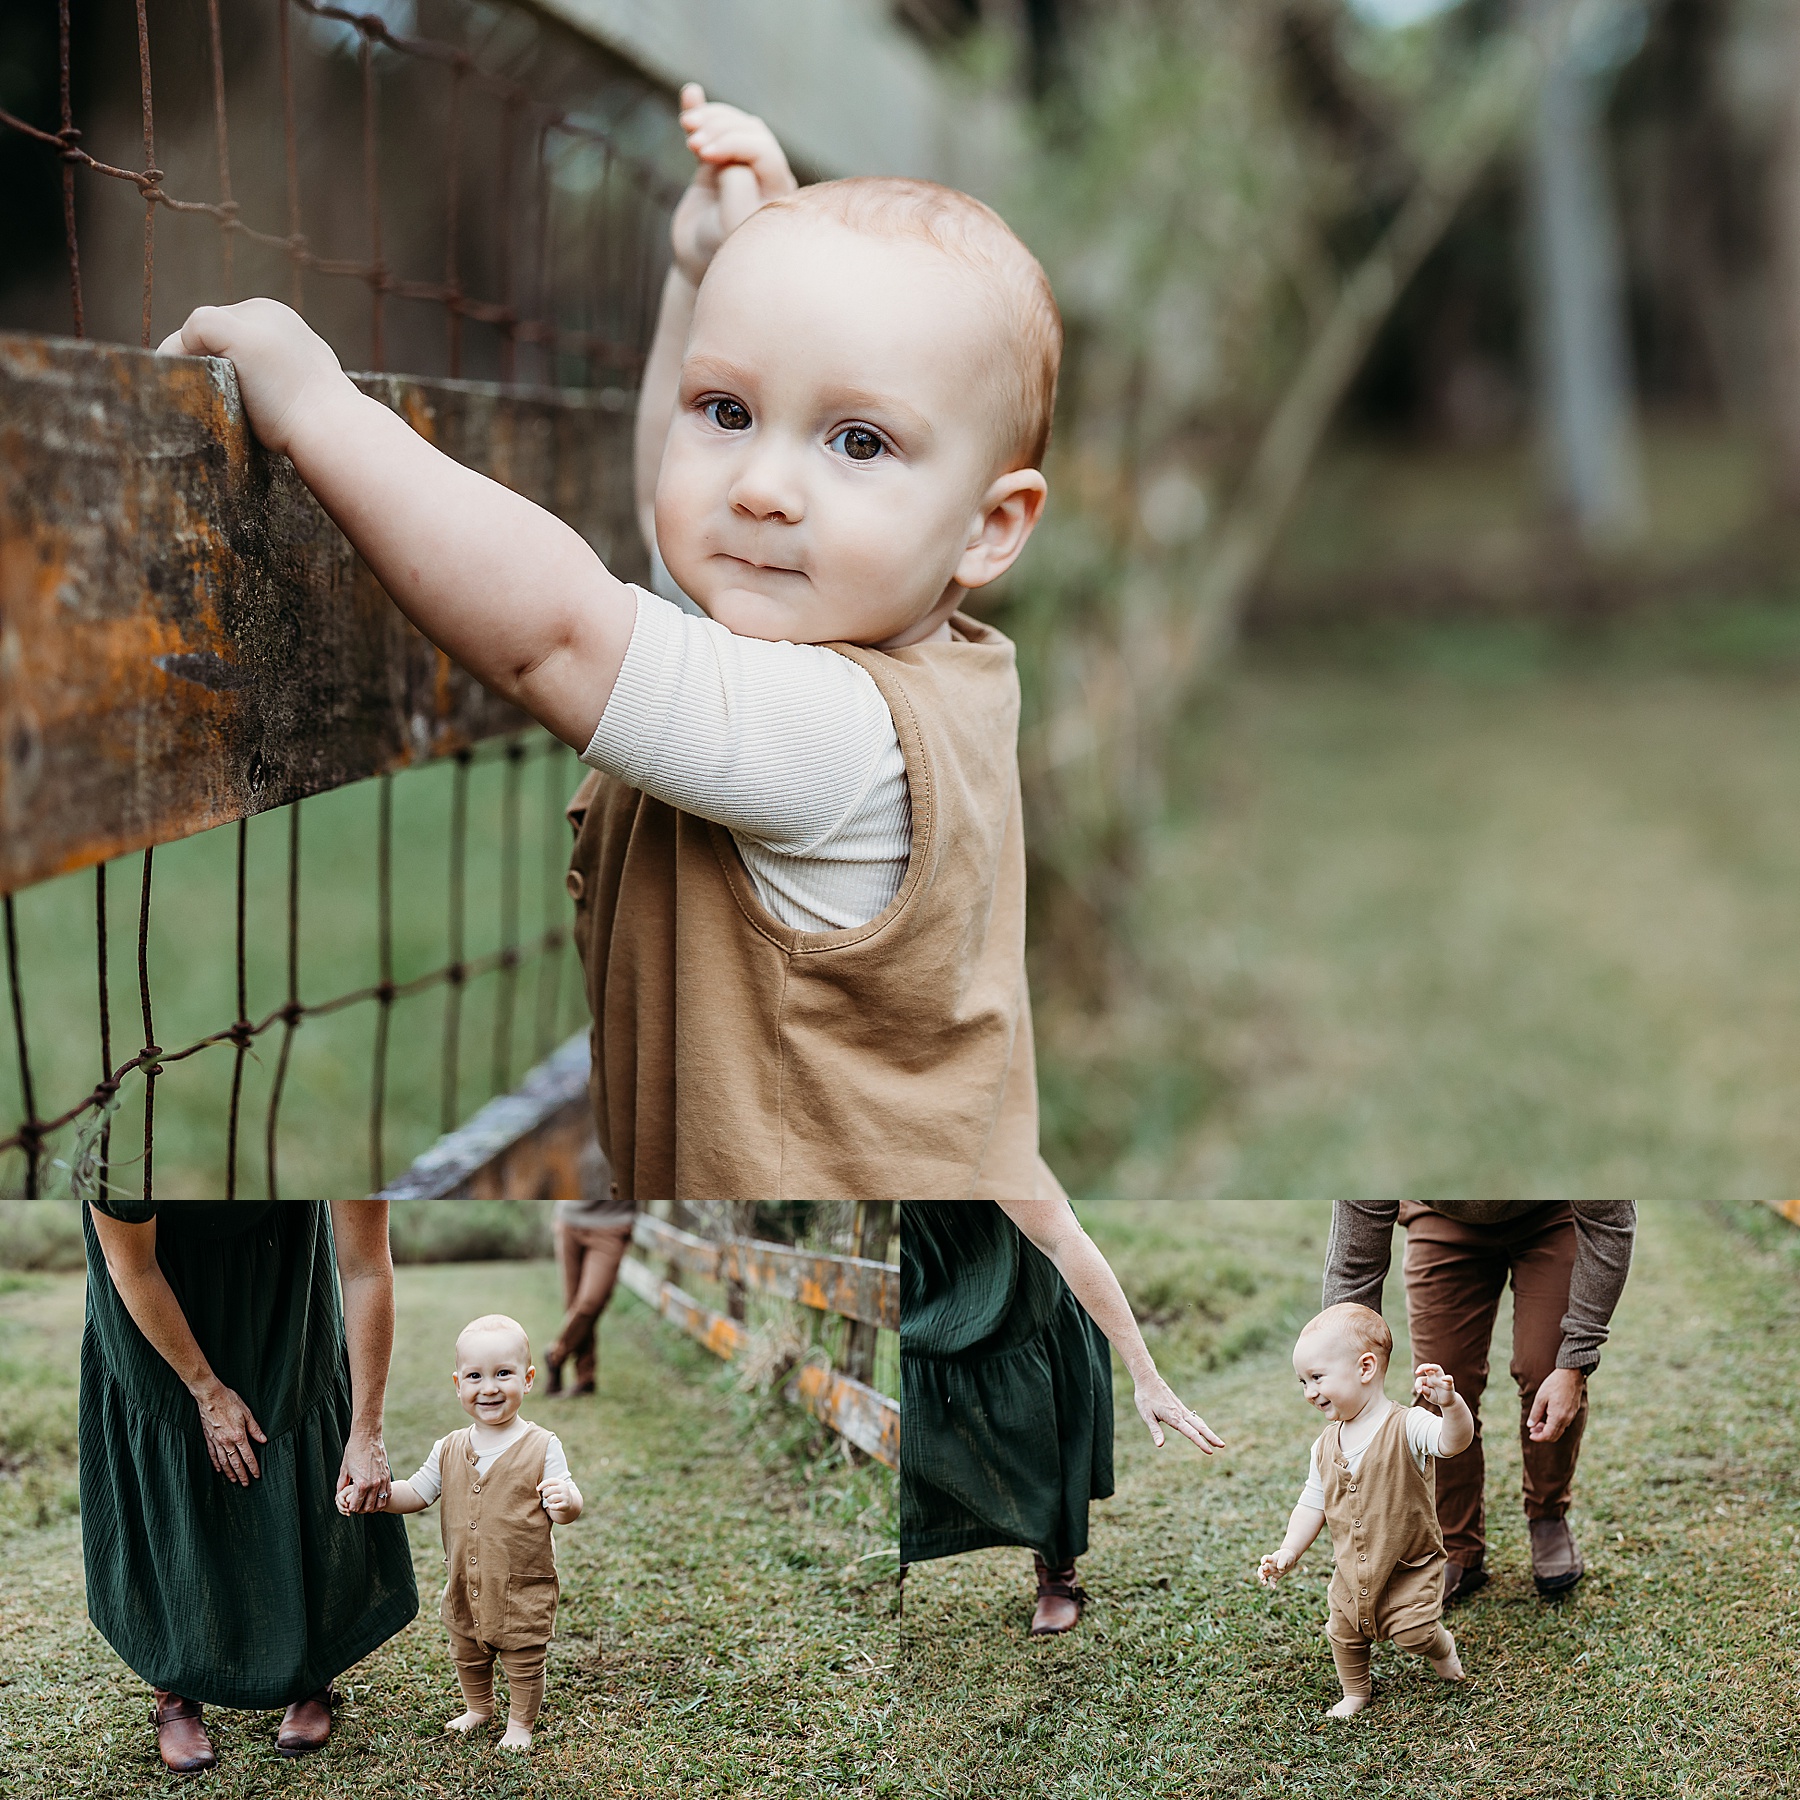 baby boy standing in neutral clothing barefoot in the grass by fence